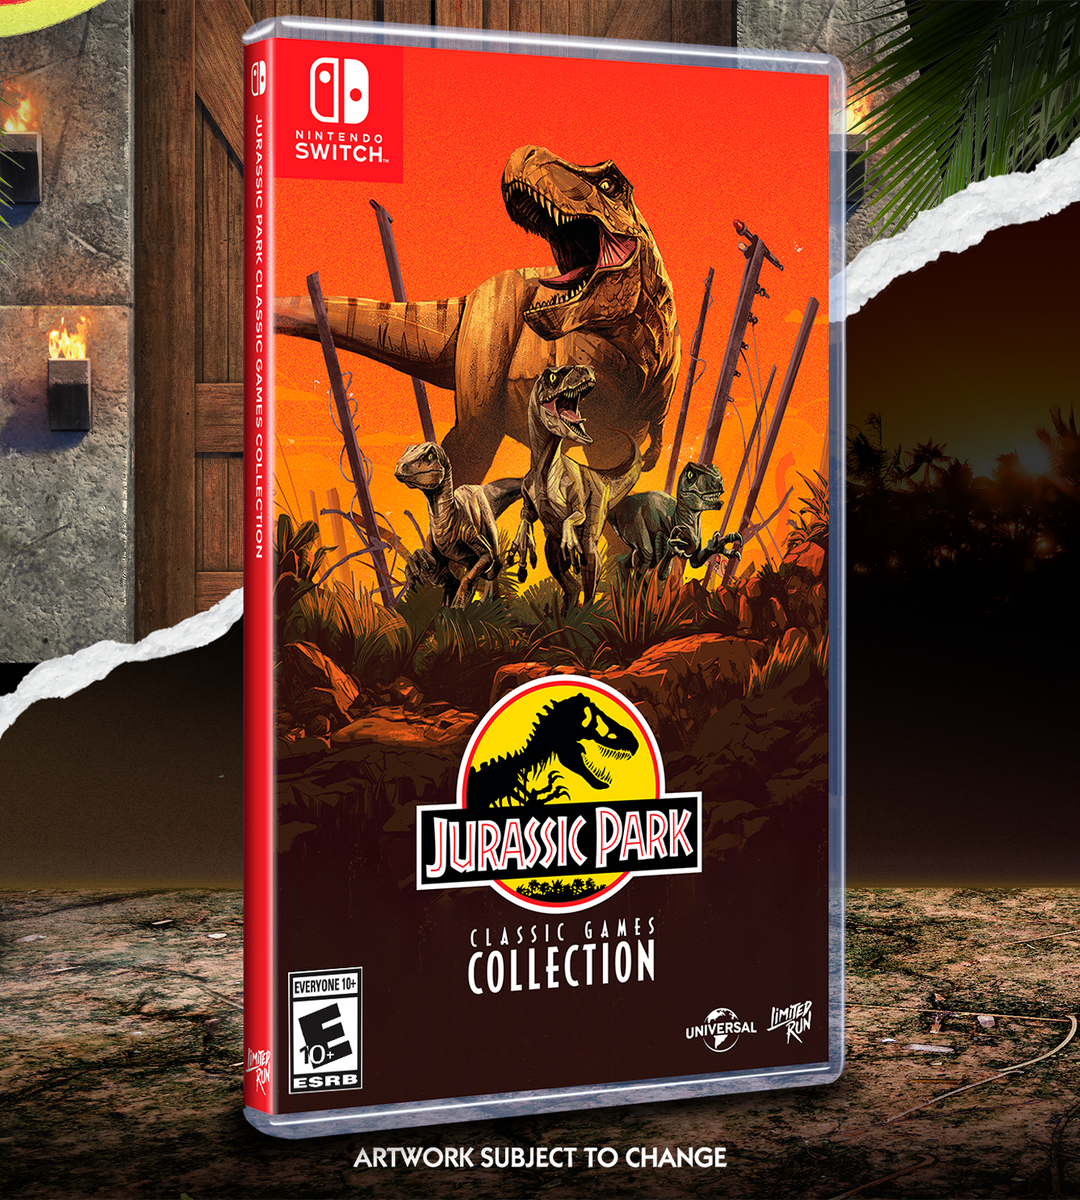 jurassic-park-classic-games-collection-limited-run-games-switch-1_1200x1200.png